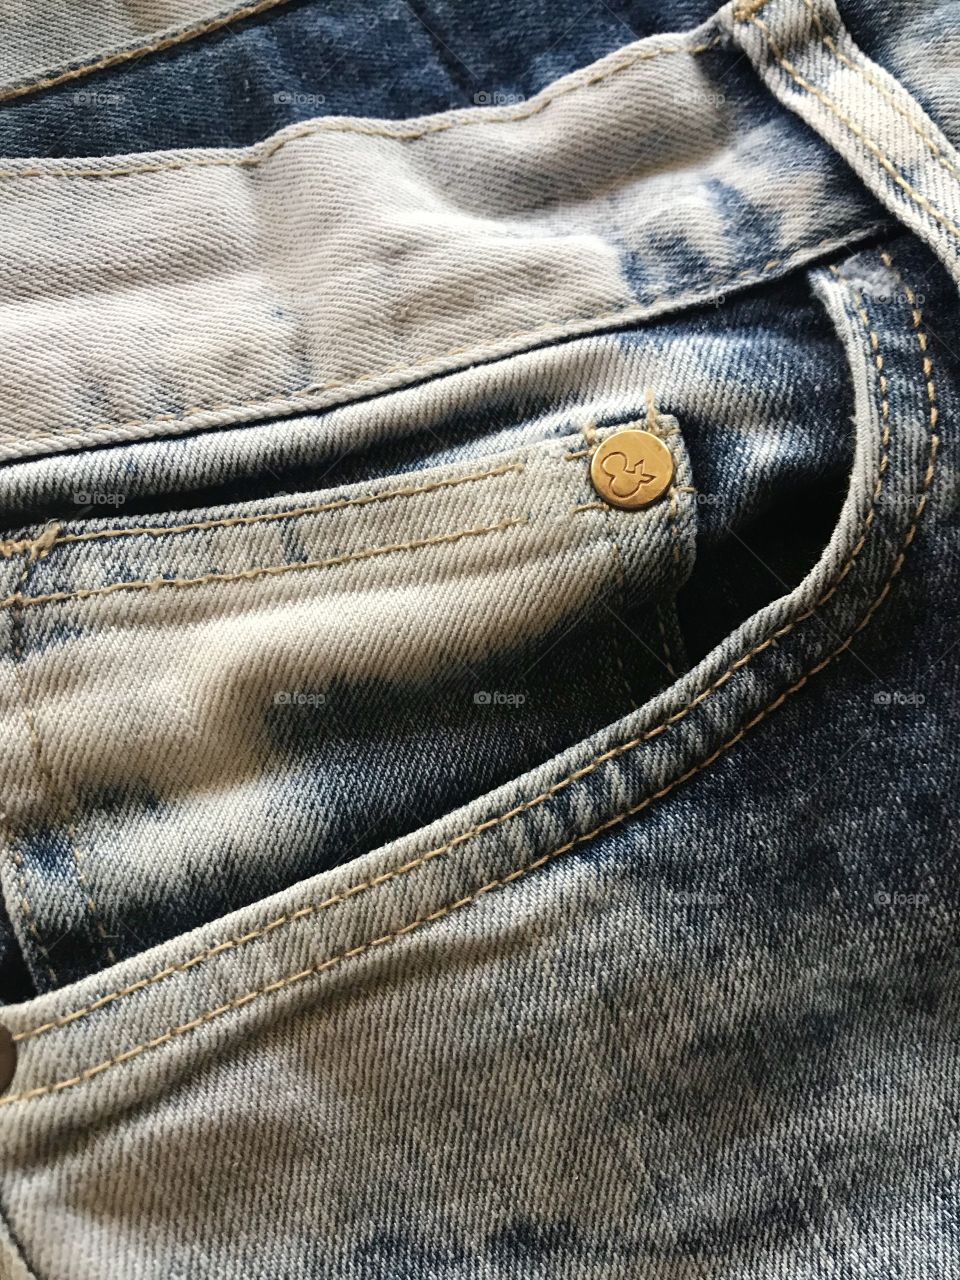 Close up details jeans fashion rugged